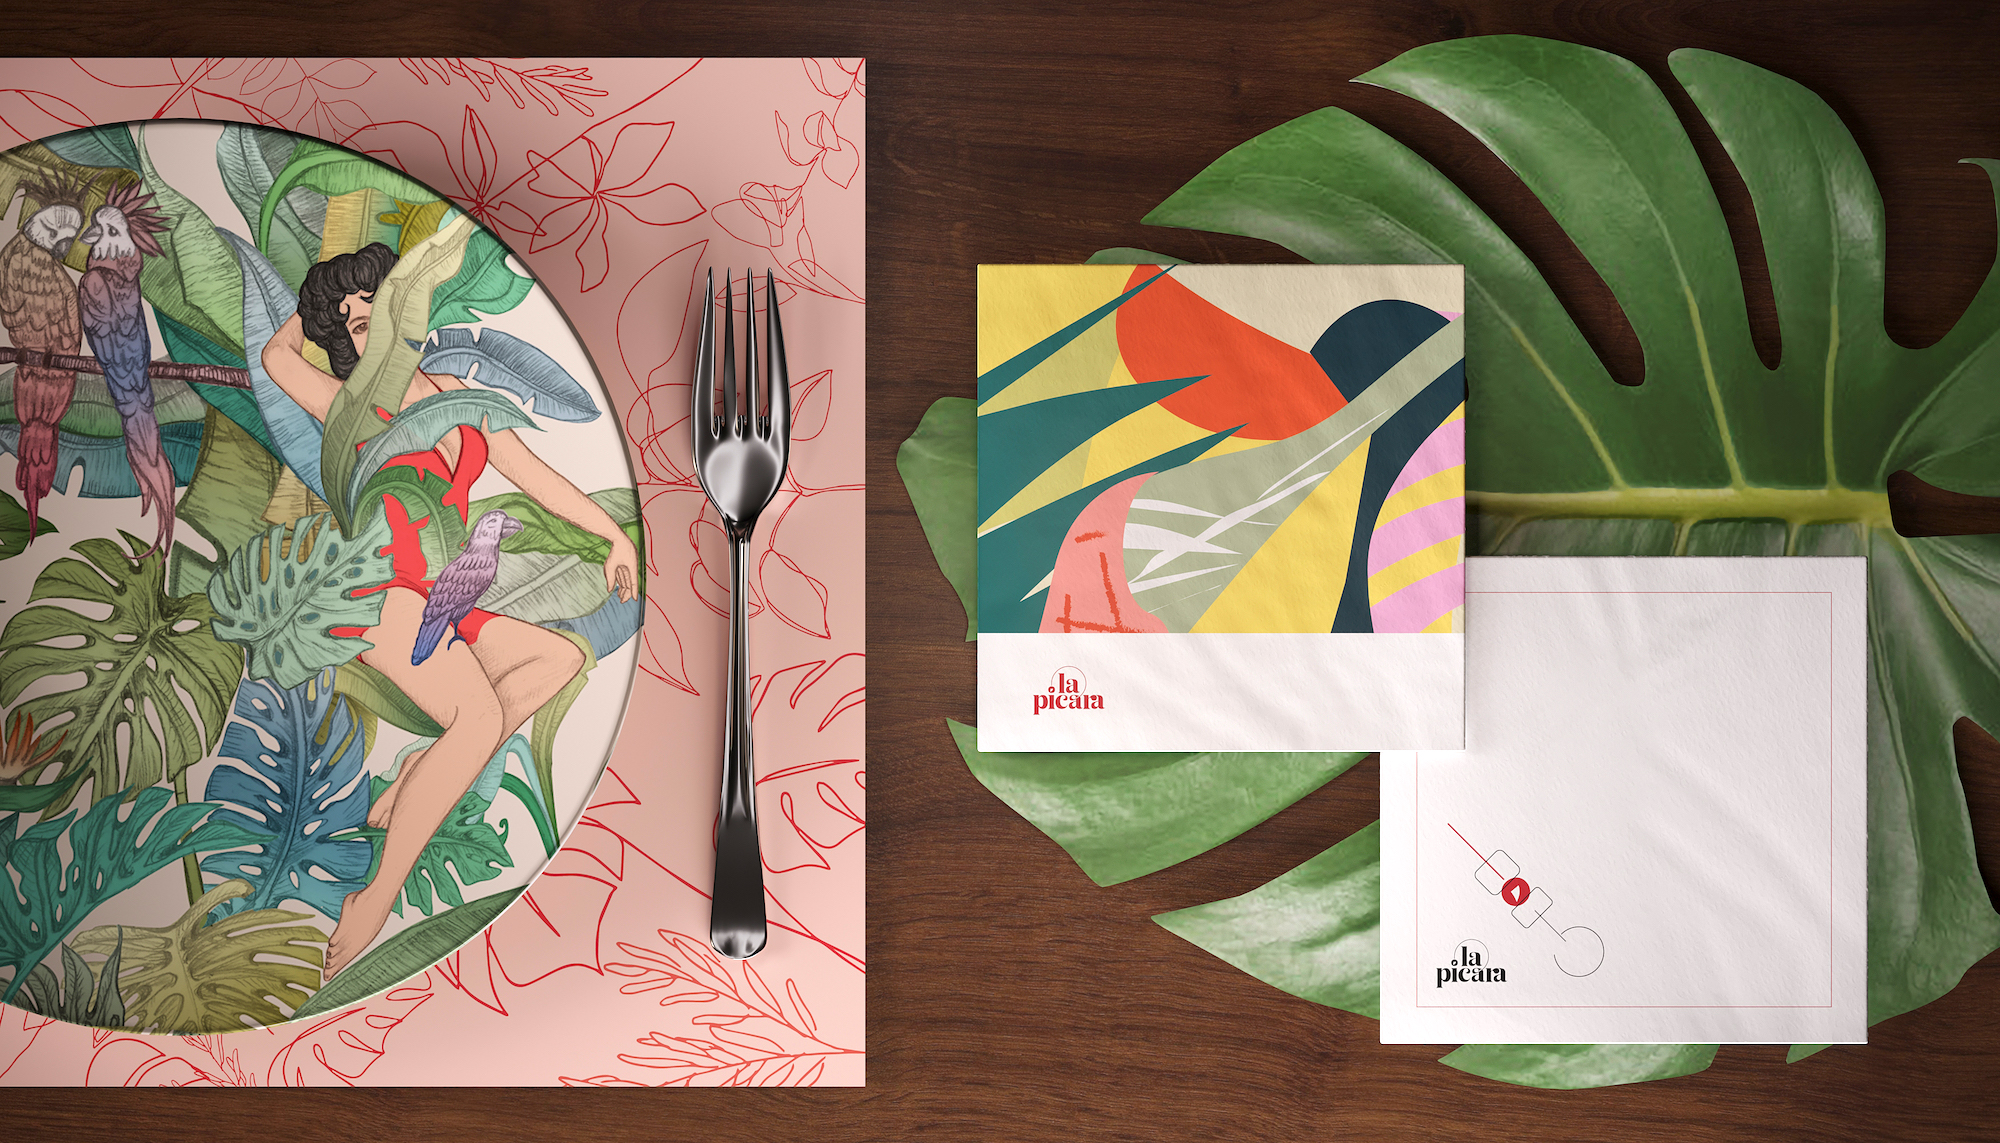 How to make F&B branding work for you, according to Design For Tomorrow’s Ric Gindap